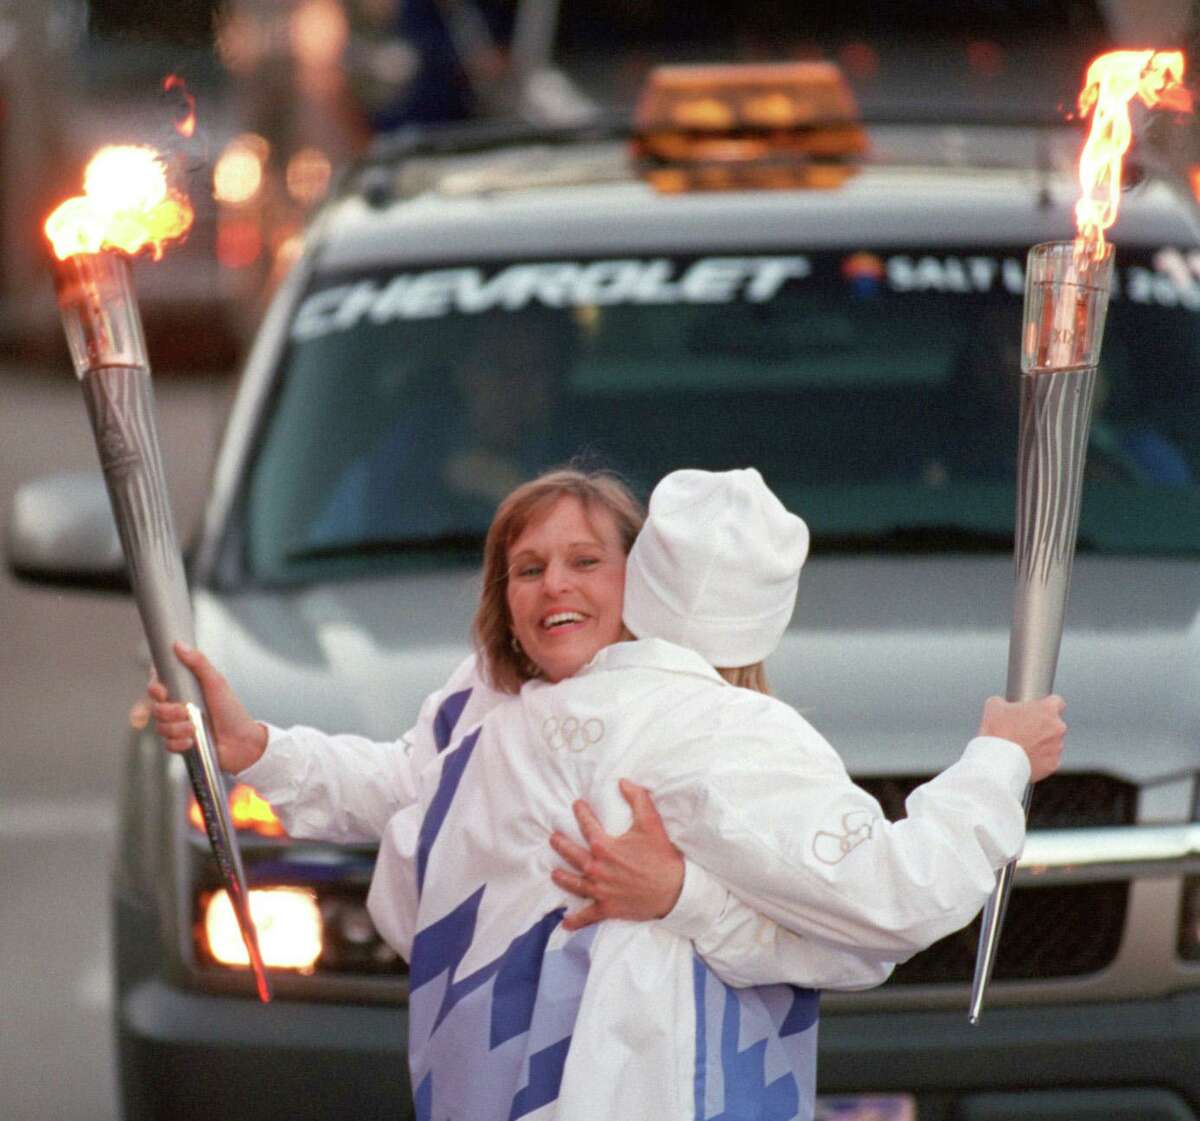 Donna Plewa-Allen of Katy, left, hugs Dana Walker, also of Katy, as they exchange the Olympic flame Dec. 10, 2001 along Post Oak. The pair were part of the 2002 Olympic Torch Relay, which carried the torch to Salt Lake City for the Winter Games.